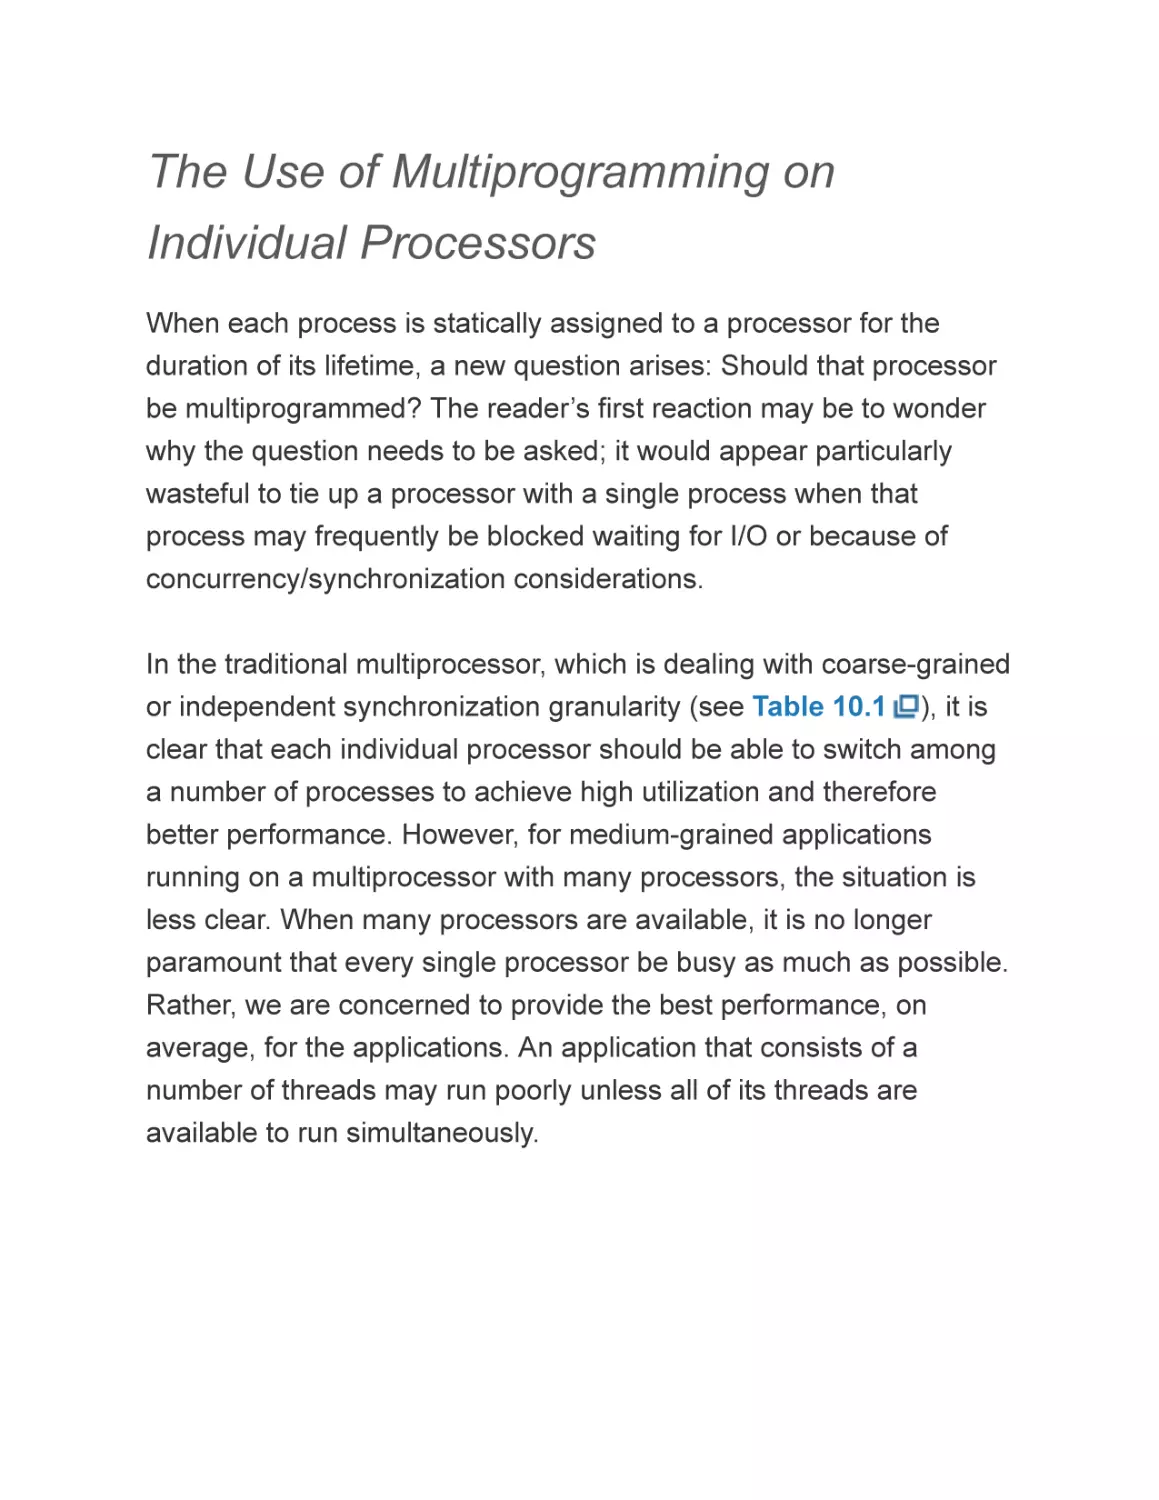 The Use of Multiprogramming on Individual Processors